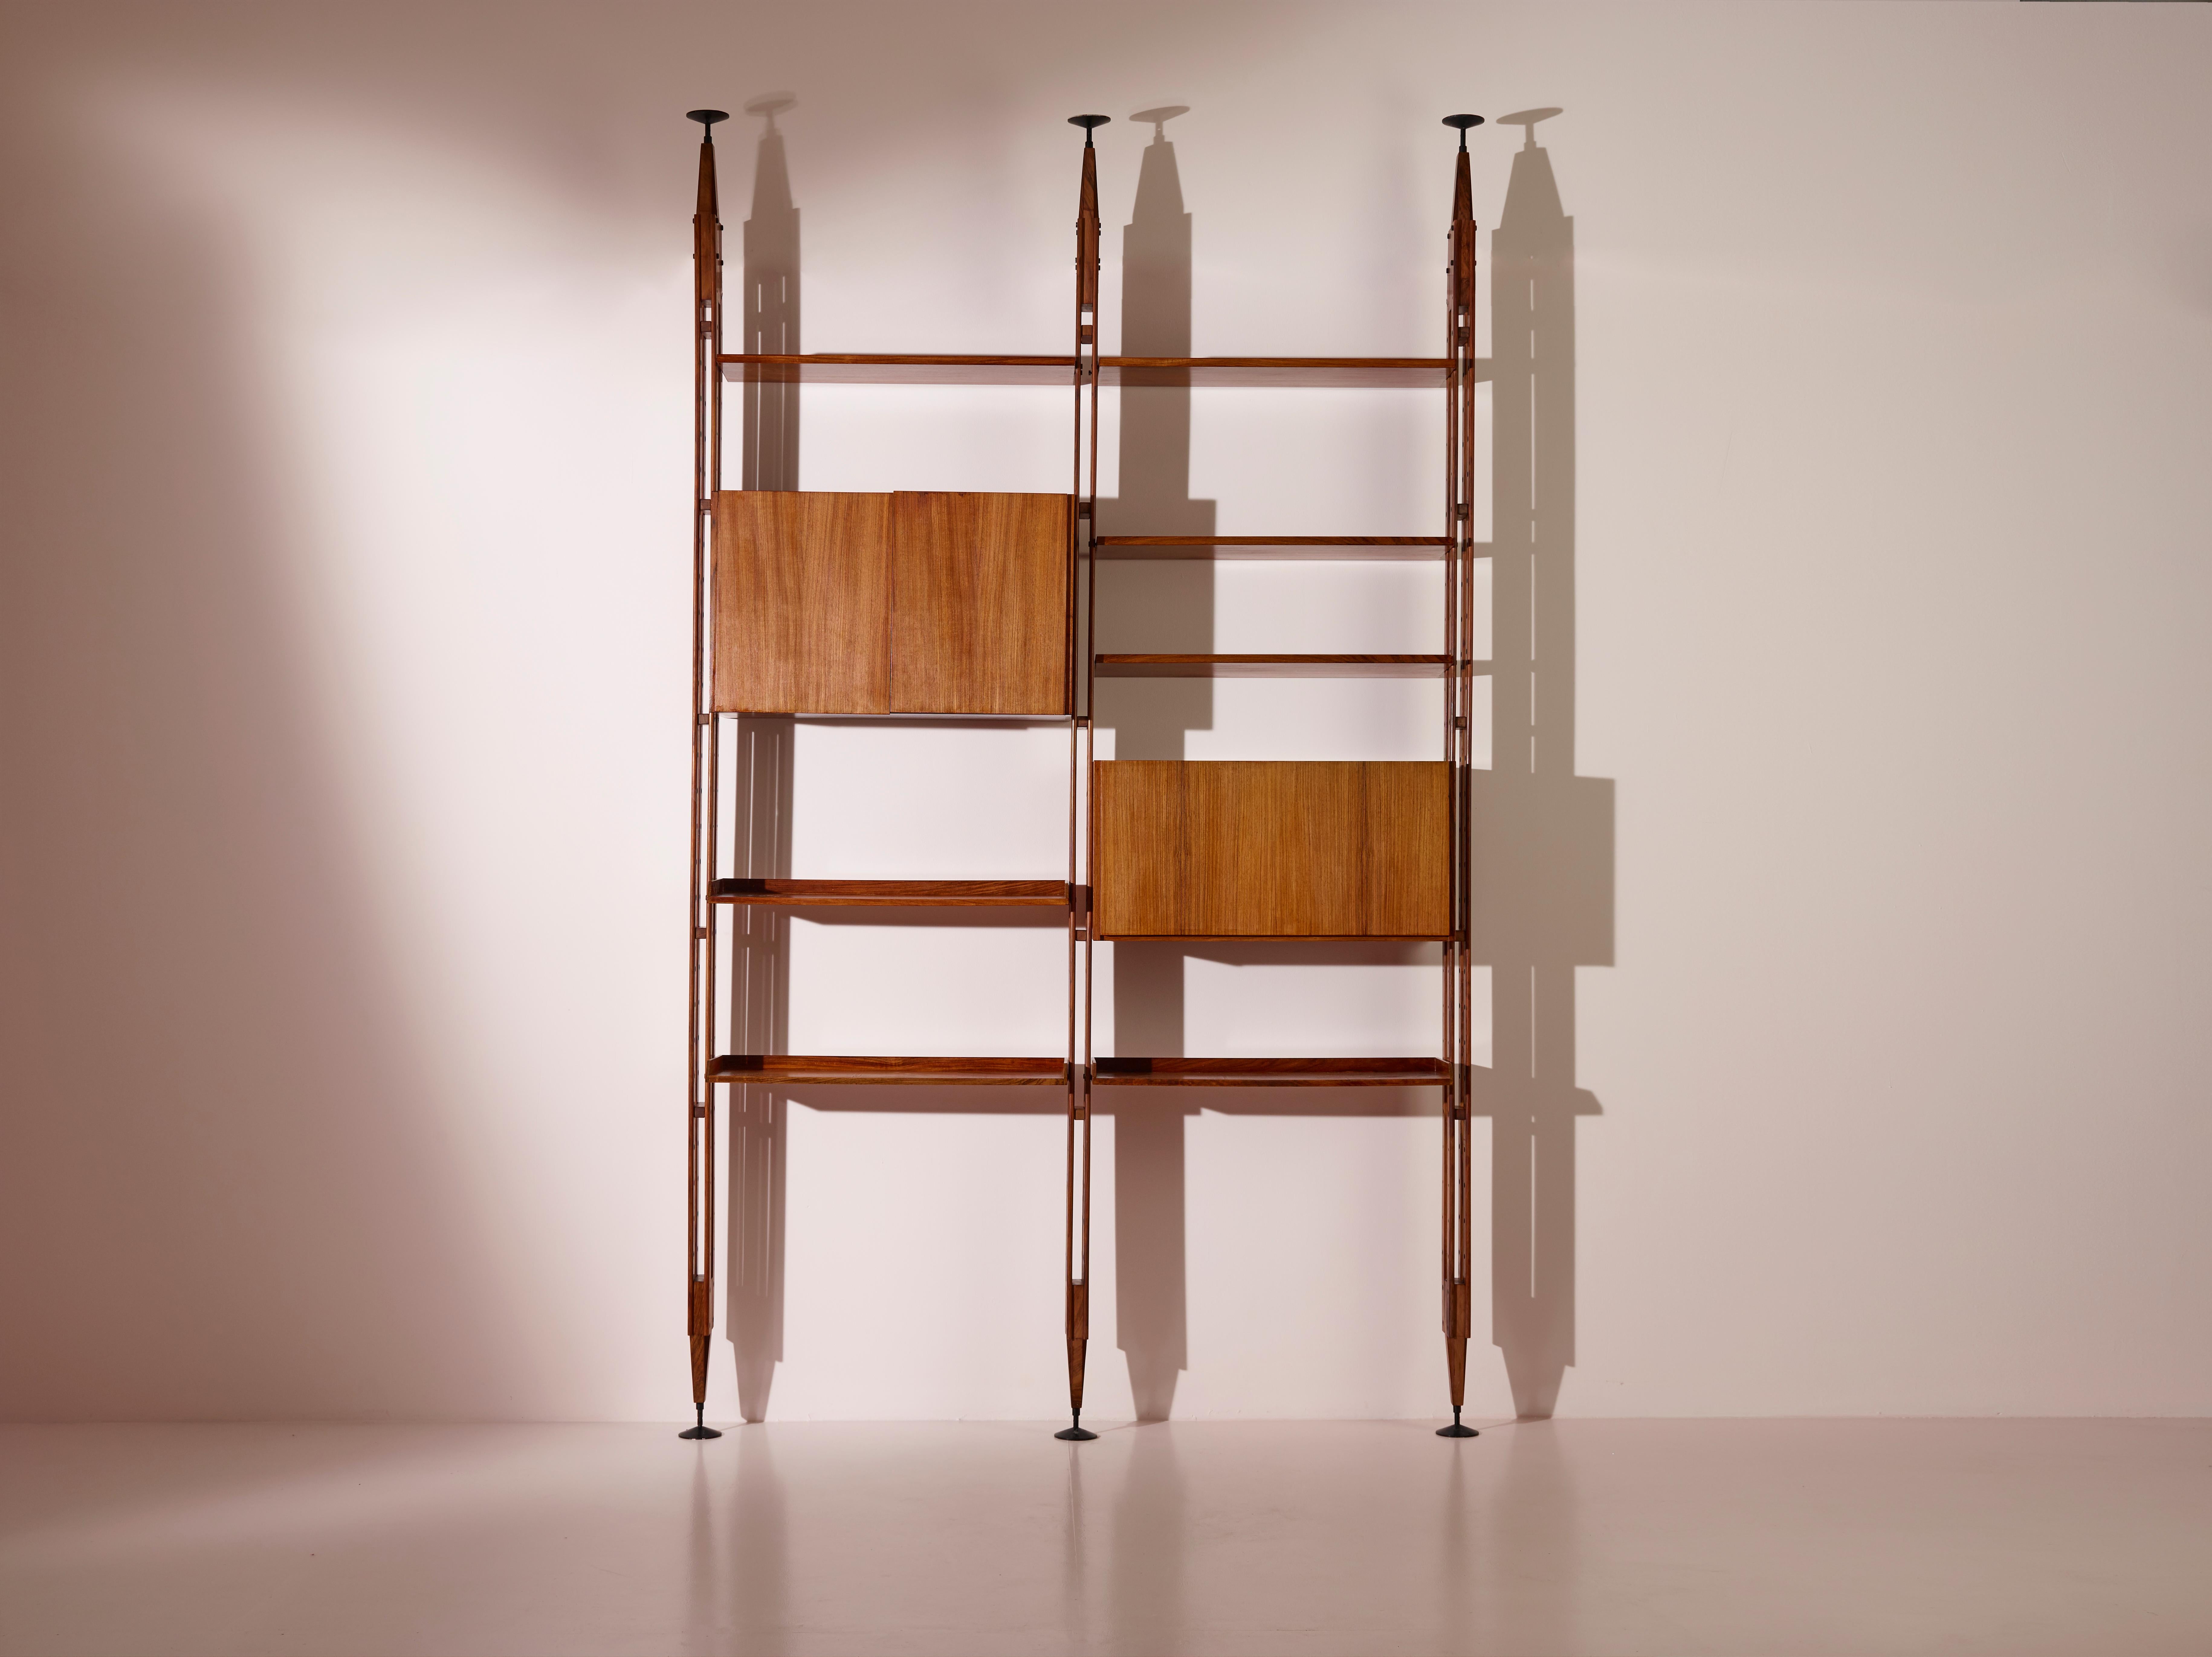 The LB7 bookcase, a timeless piece of mid-century design, epitomizes the visionary approach of Franco Albini, a pioneer in the world of Italian furniture. Crafted in 1955 and meticulously manufactured by Poggi Pavia, this free-standing library